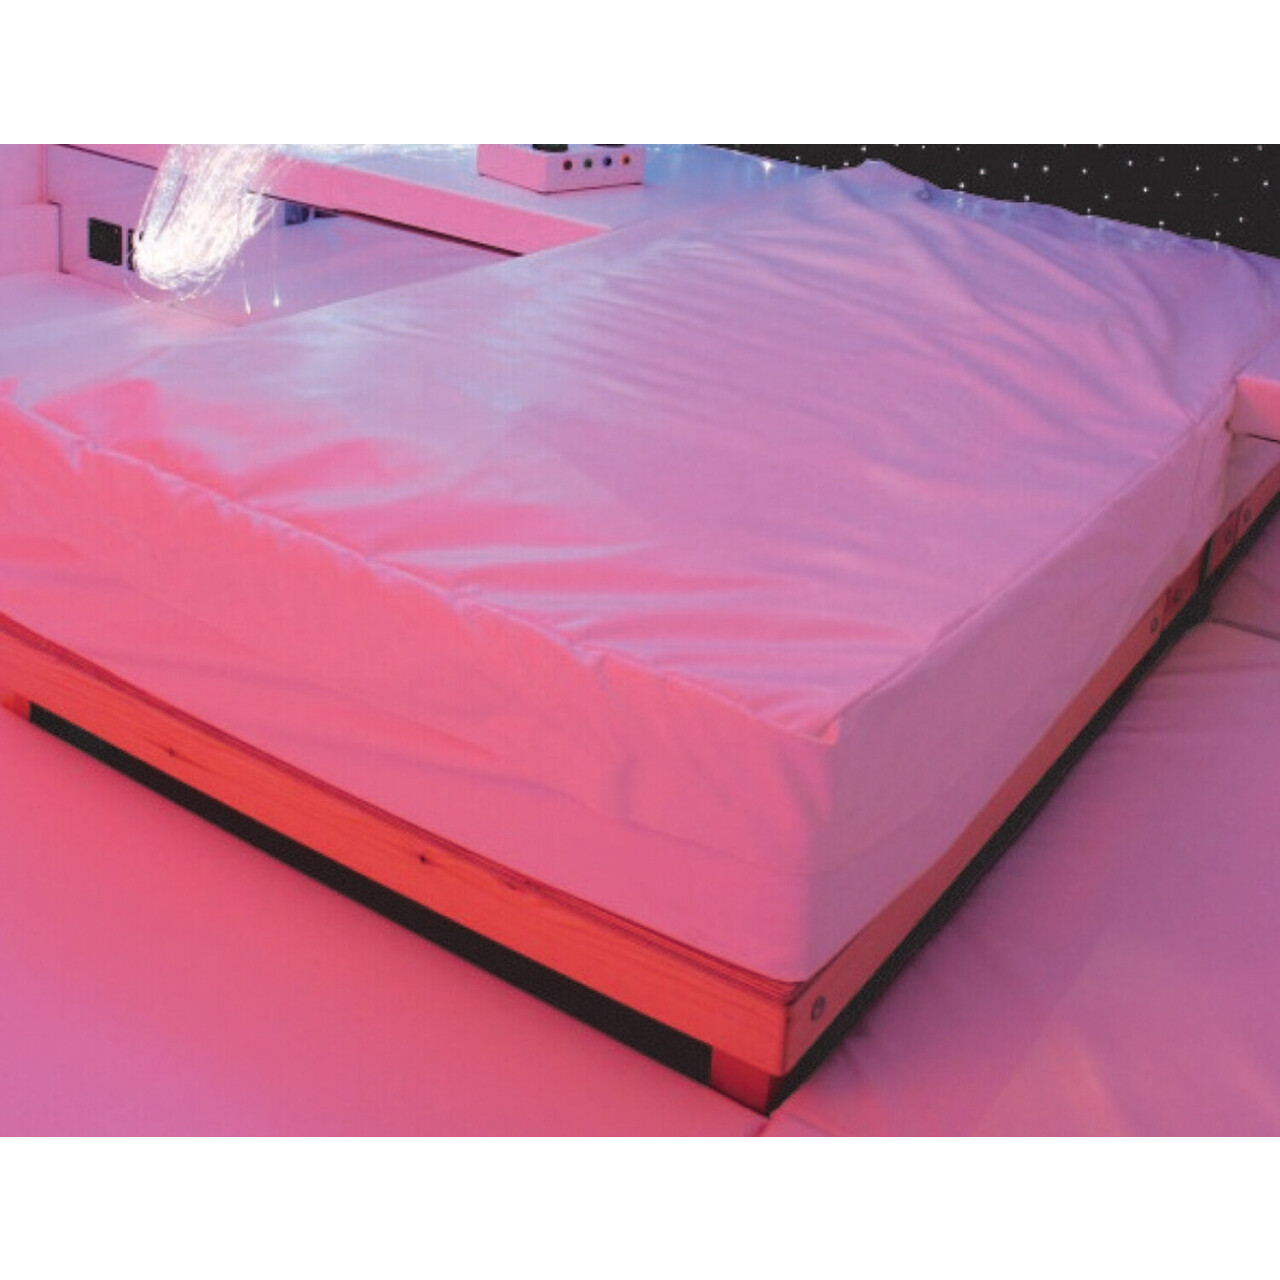 Waterbed With Wooden Platform Frame By Tfh, Can You Put A Waterbed Mattress On Regular Frame